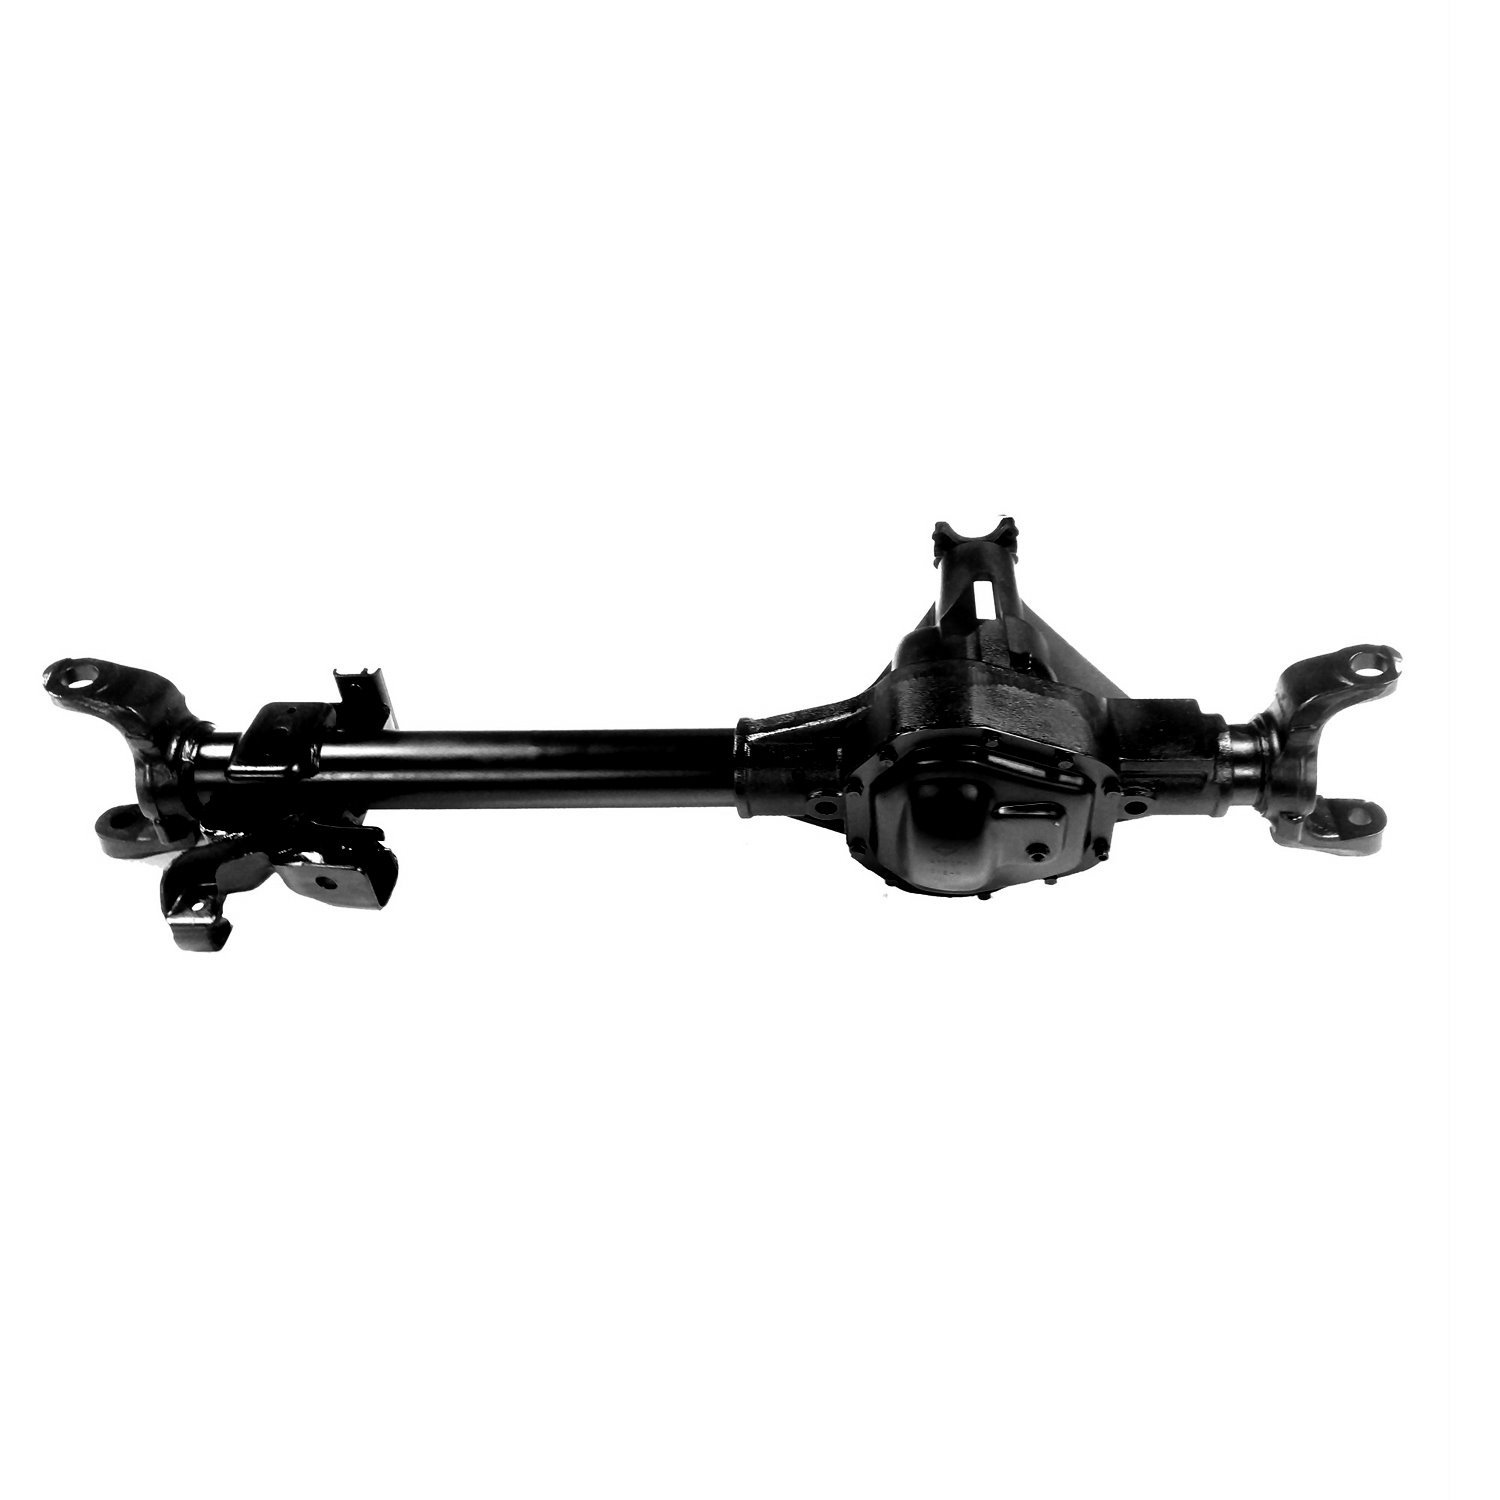 Remanufactured Axle Assy for Dana 60 Front 02-04 F250 & F350 3.73 , SRW w/ 4 Wheel ABS